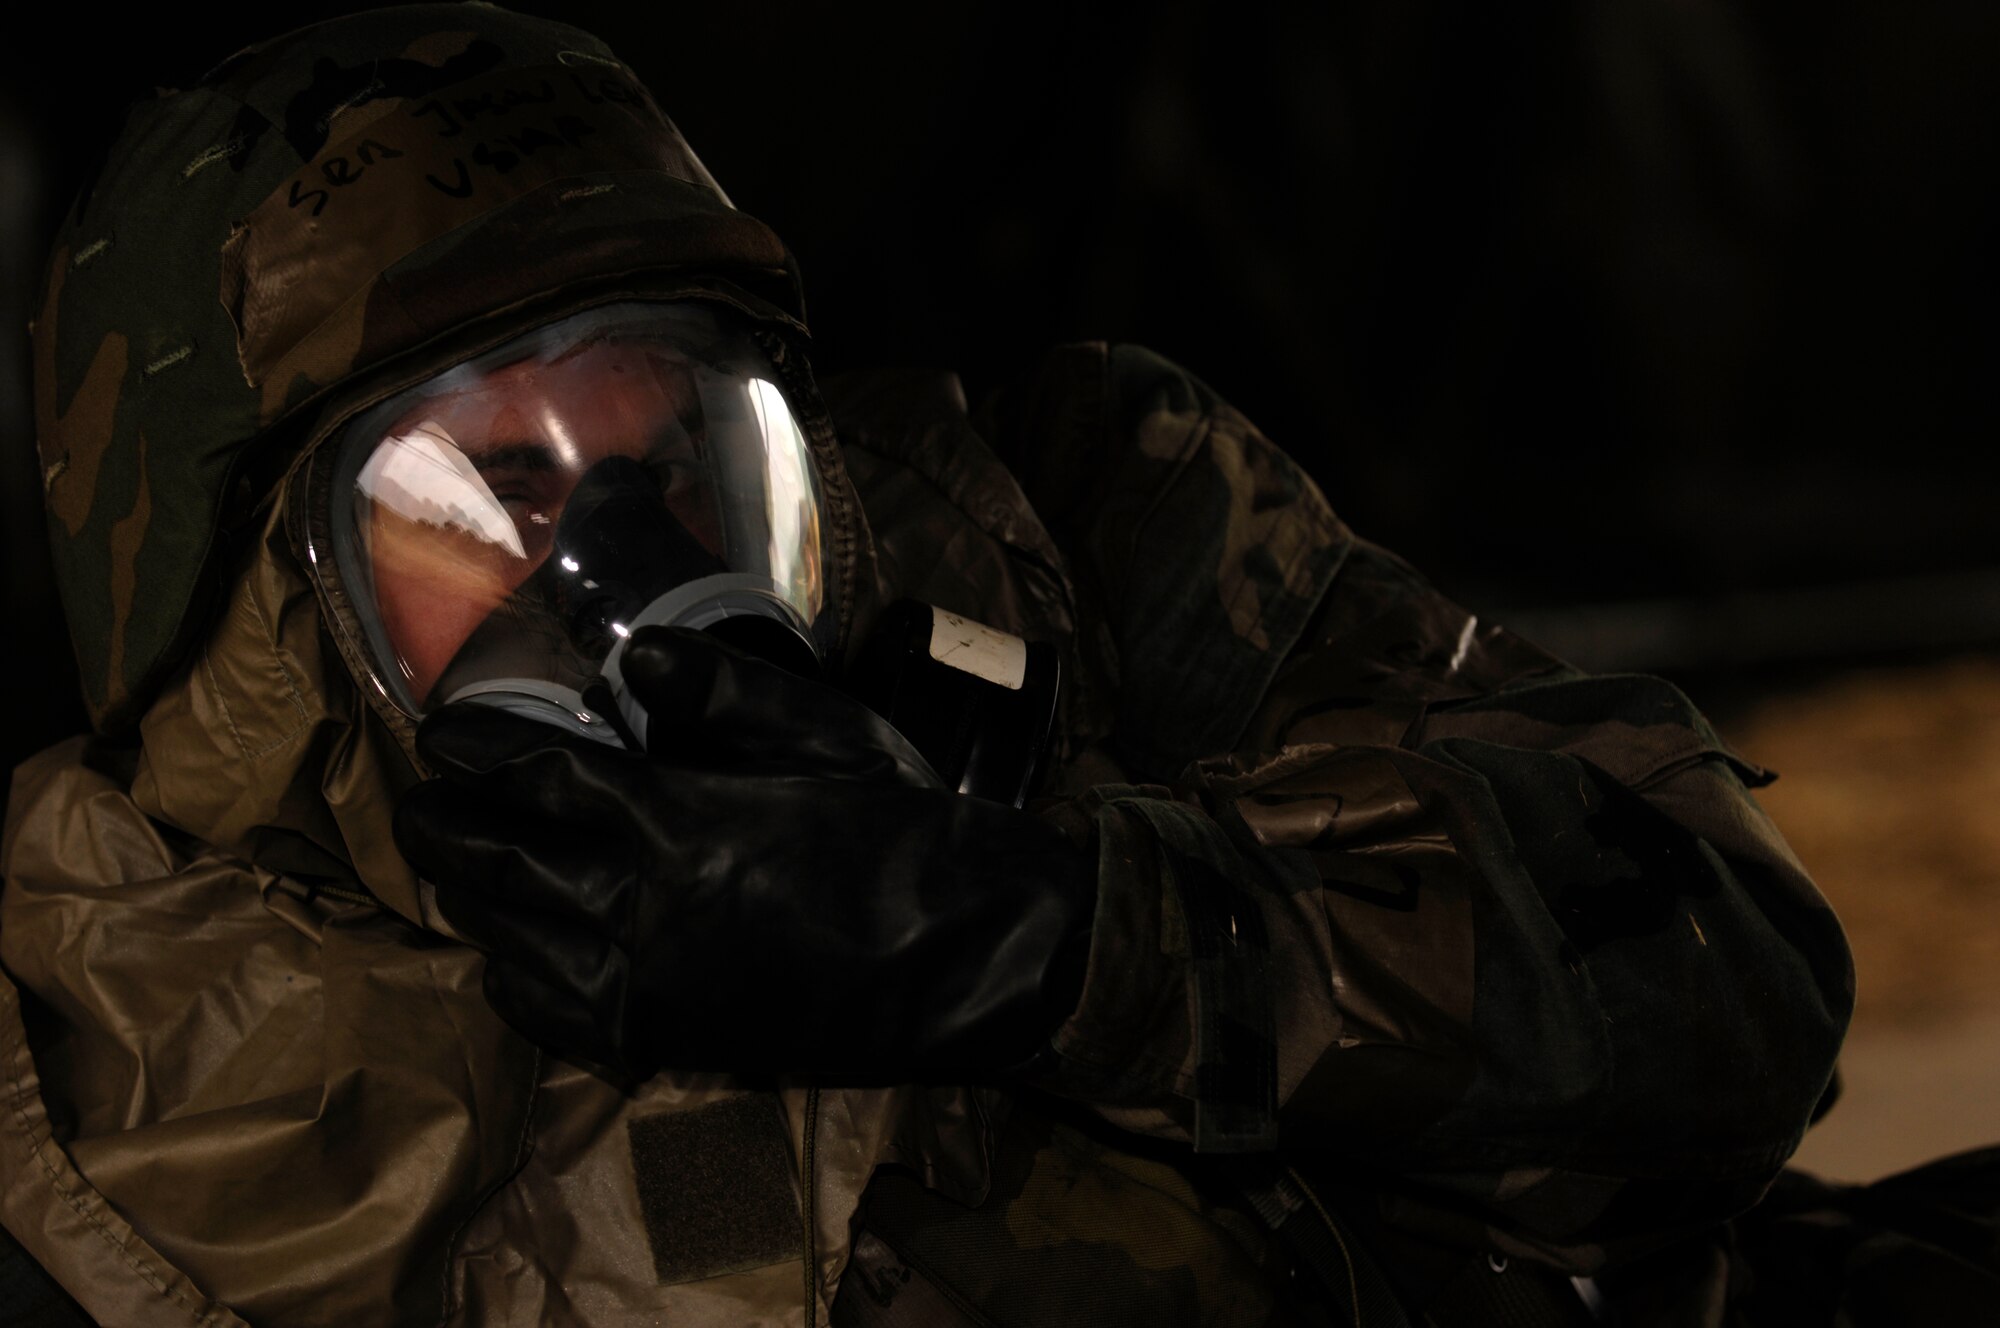 VANDENBERG AIR FORCE BASE, Calif. -- Senior Airman Jason Levy, 614th Space Communications Squadron, dons his gas mask during a chemical attack exercise during North Star on Aug. 23. North Star is designed to teach Airmen the combat skills needed while deployed. (U.S. Air Force photo/Airman 1st Class Christian Thomas)

